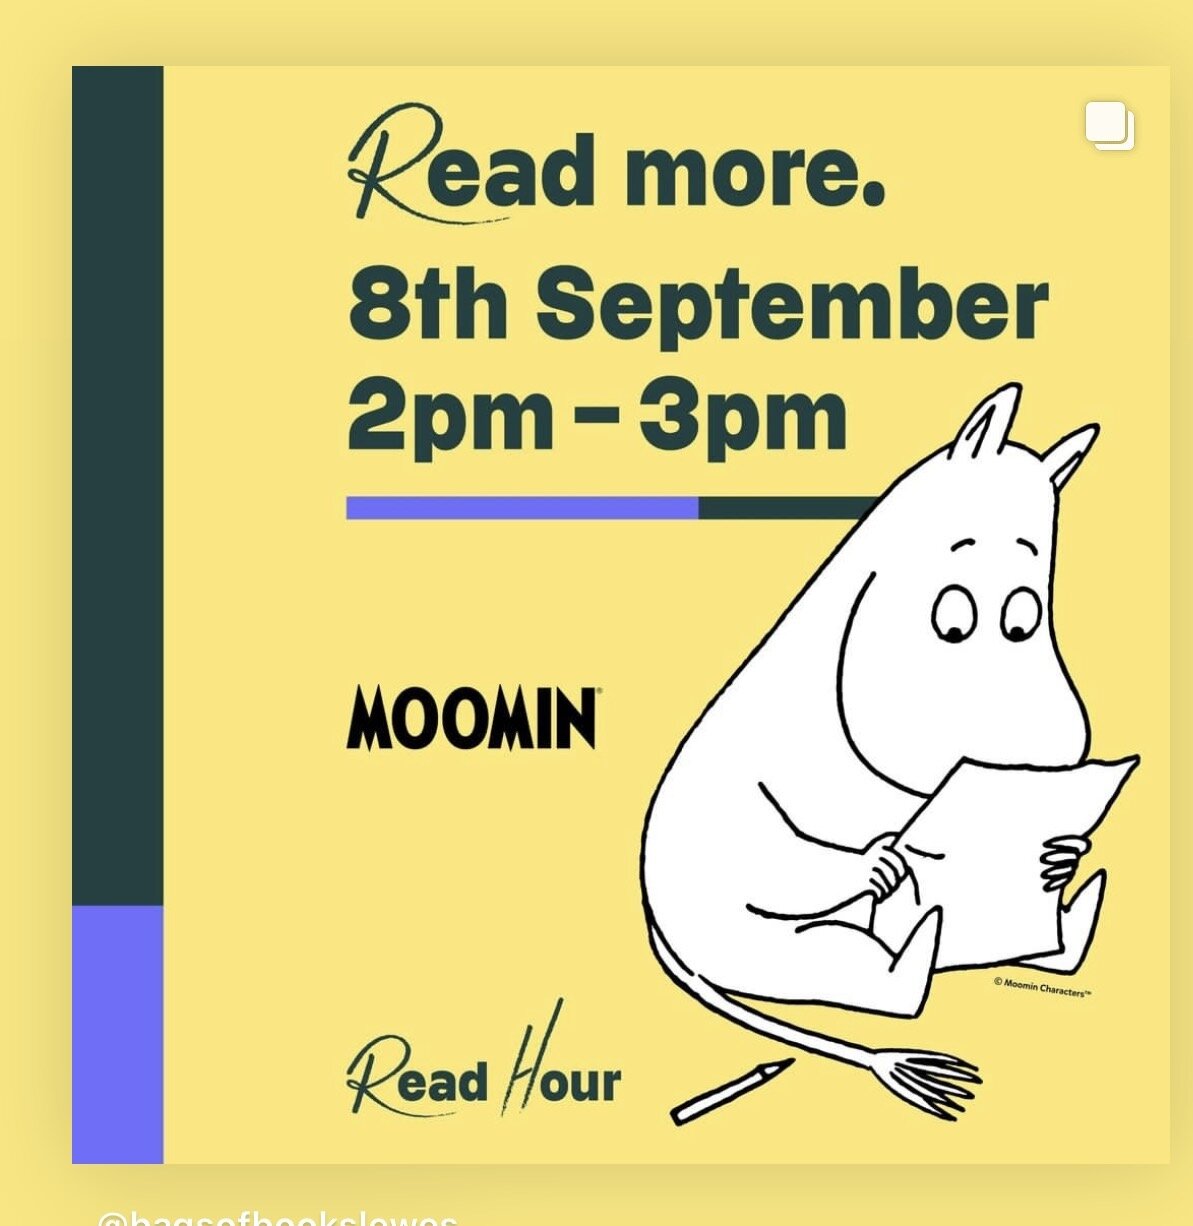 Time to pluck that book you&rsquo;ve always meant to dip into from your shelves and prepare for #readhouruk. A genius 💡 to promote the simple pleasure of reading - adults acting as role models for those around them, young and old @riotcomms @moomino